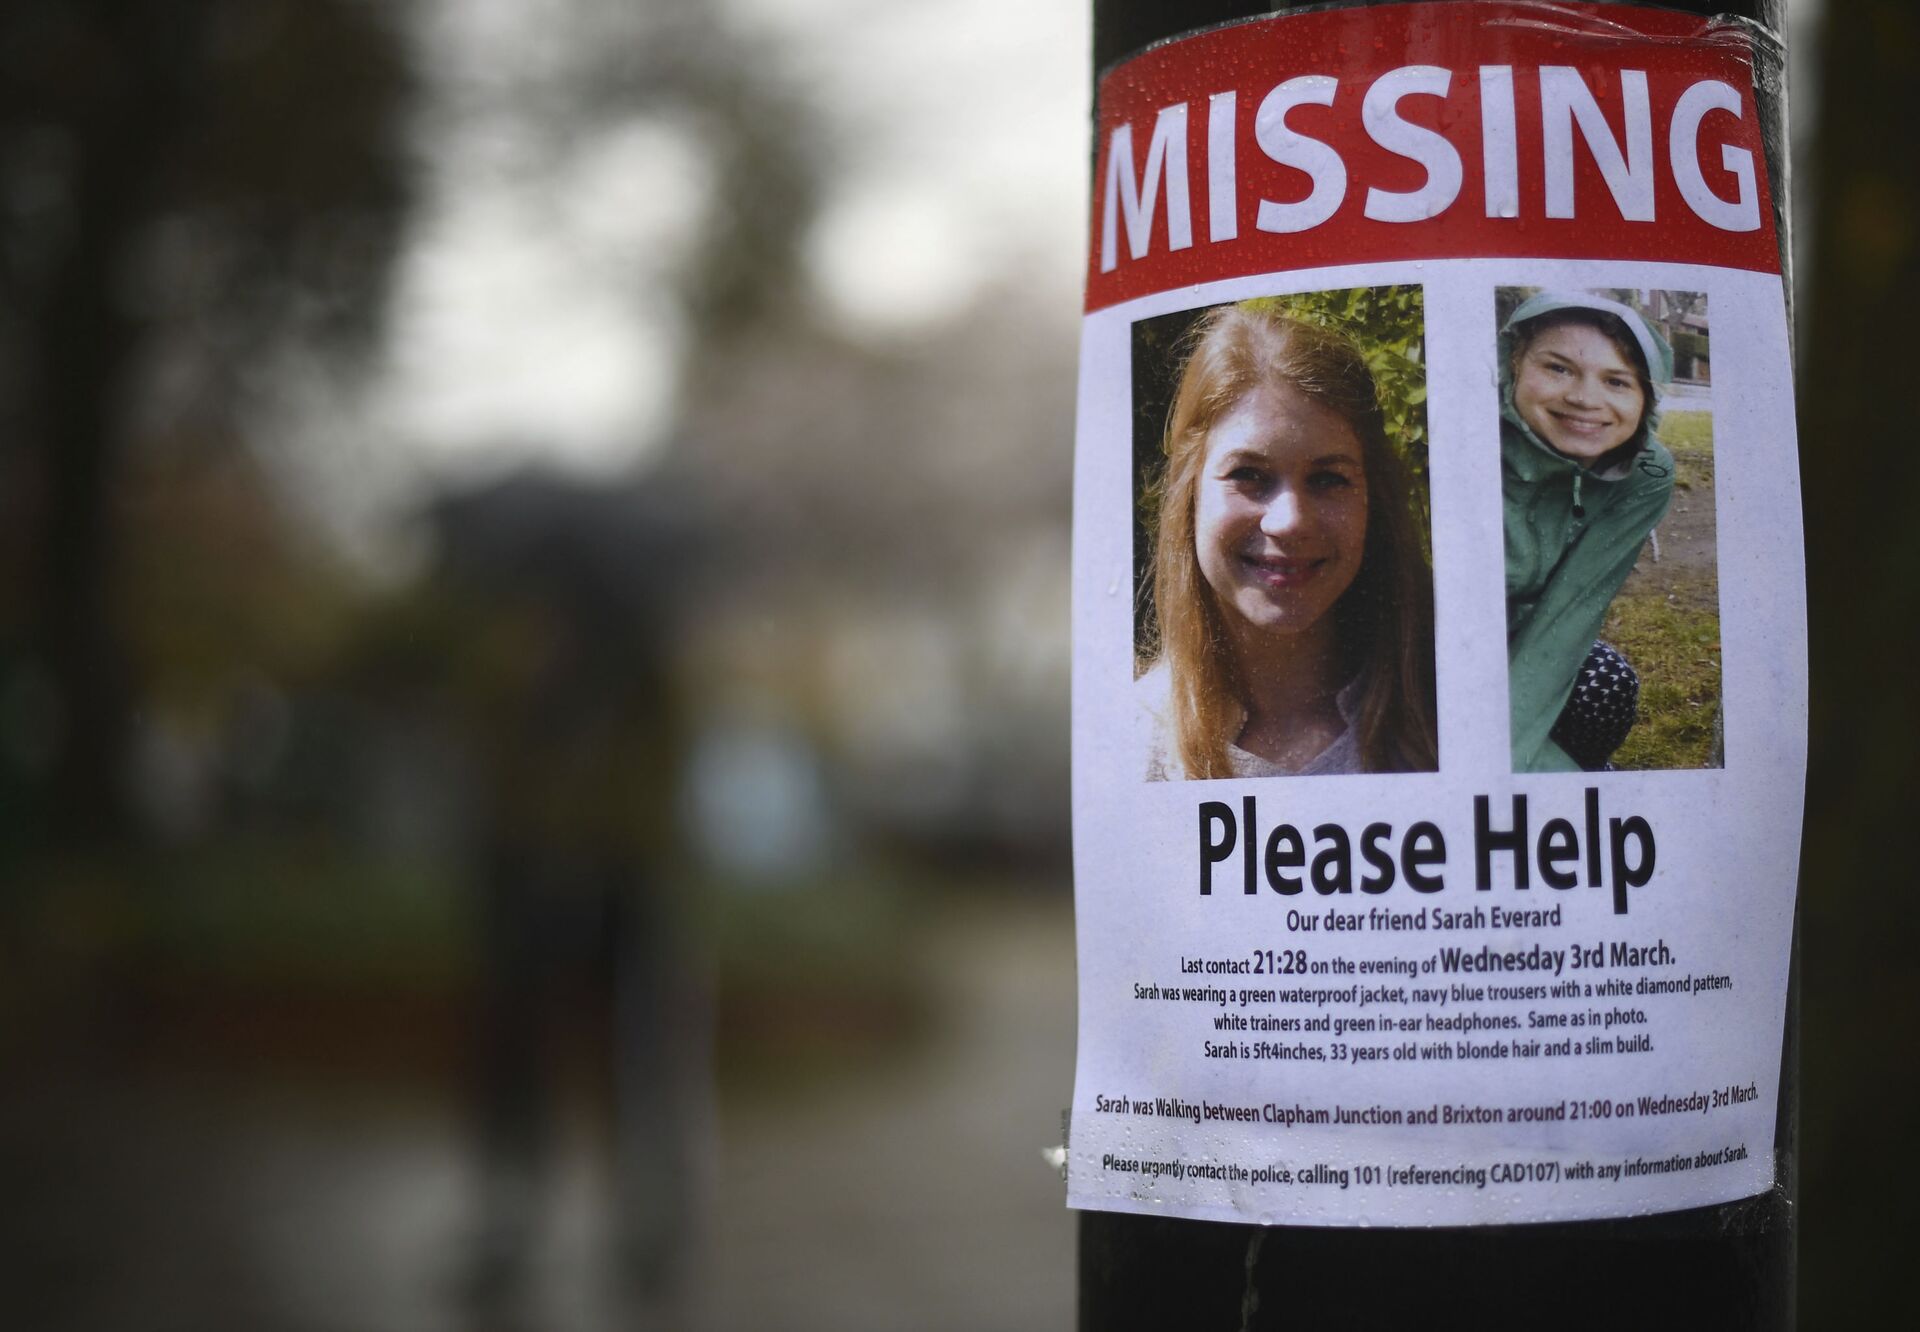 A missing sign outside Poynders Court on the A205 in Clapham, London Wednesday March 10, 2021 during the continuing search for Sarah Everard who has been missing for a week - Sputnik International, 1920, 29.09.2021